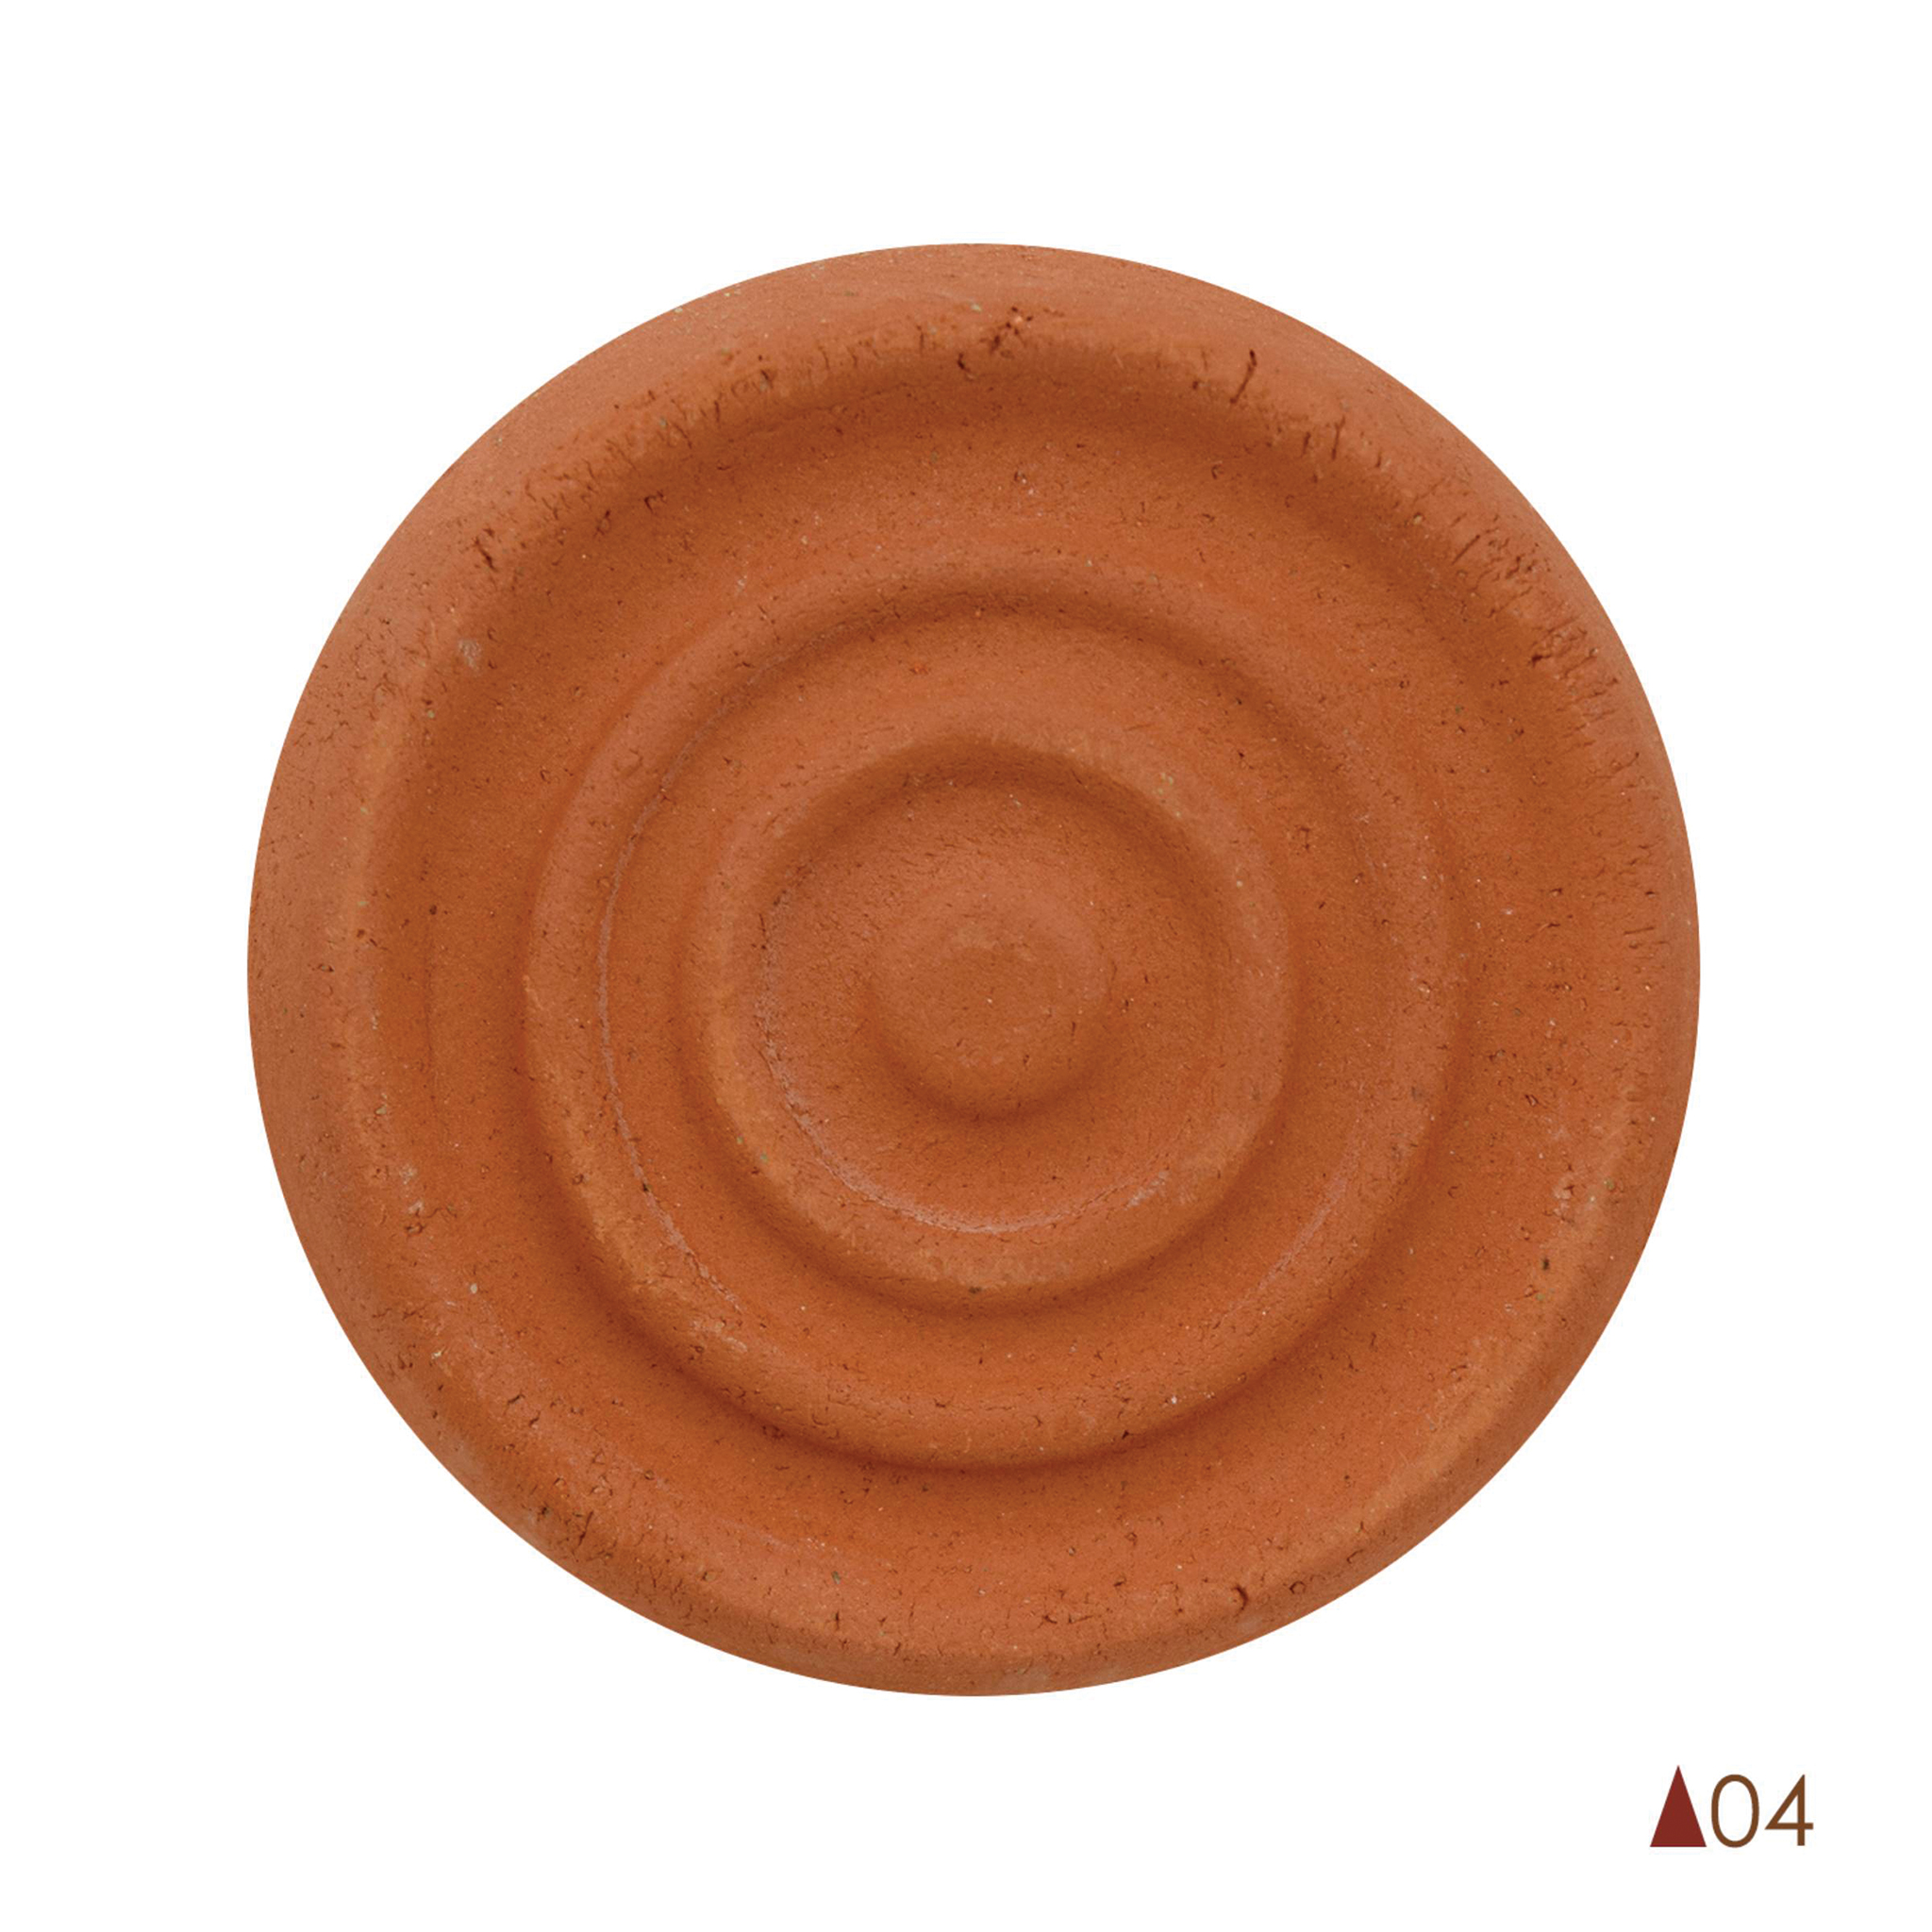 AMACO Low Fire Moist Plastic Earthenware Clay, 50 Pounds, Sedona Red 67 